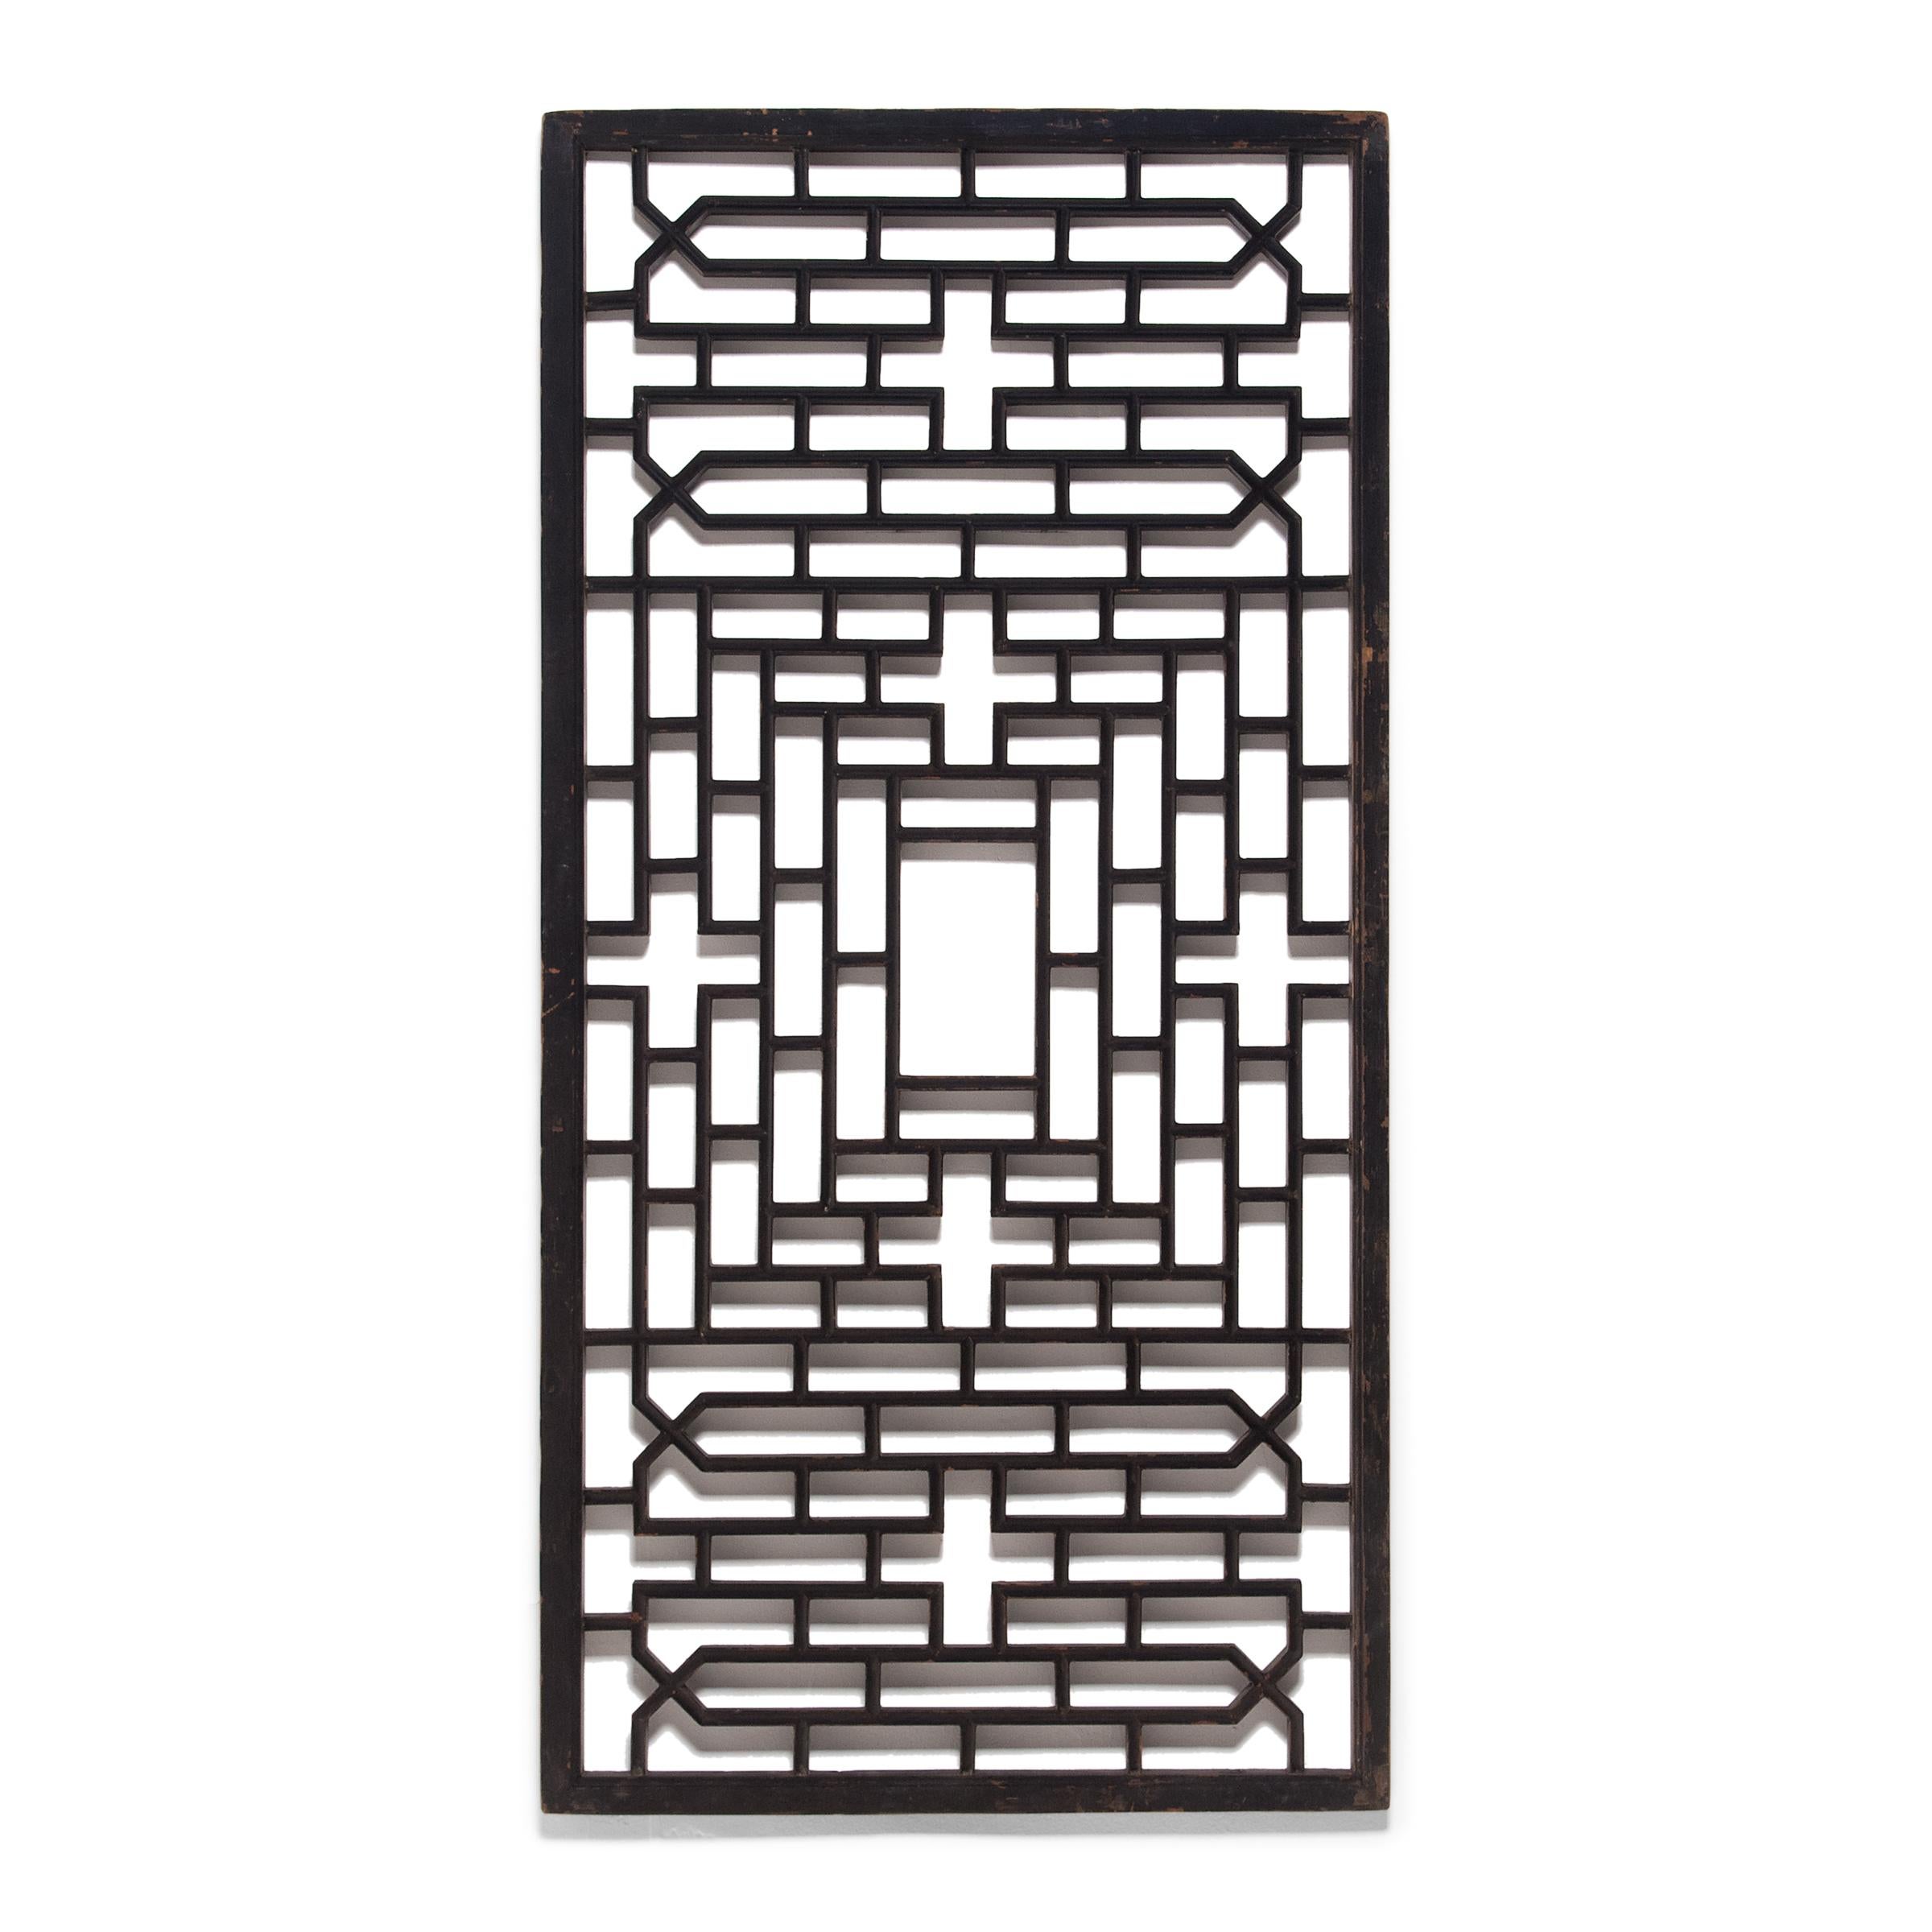 This early 20th century lattice window panel originated in Zhejiang province and once overlooked the interior courtyard of an aristocratic Chinese home. The geometric lattice pattern is linear and open, and was designed to allow light and fresh air